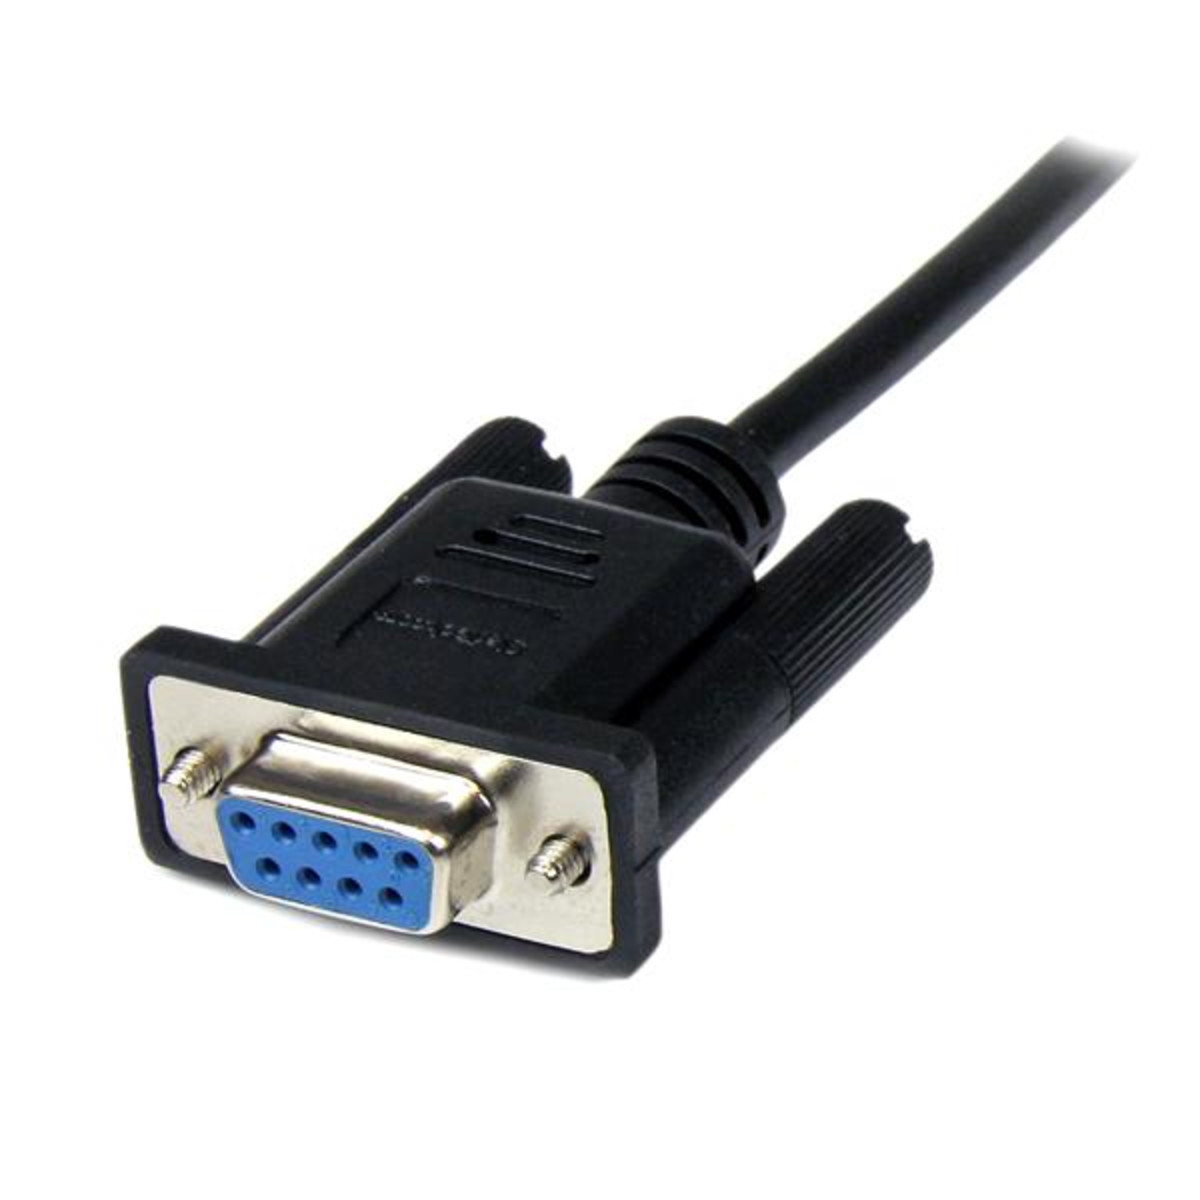 1m DB9 RS232 Serial Null Modem Cable